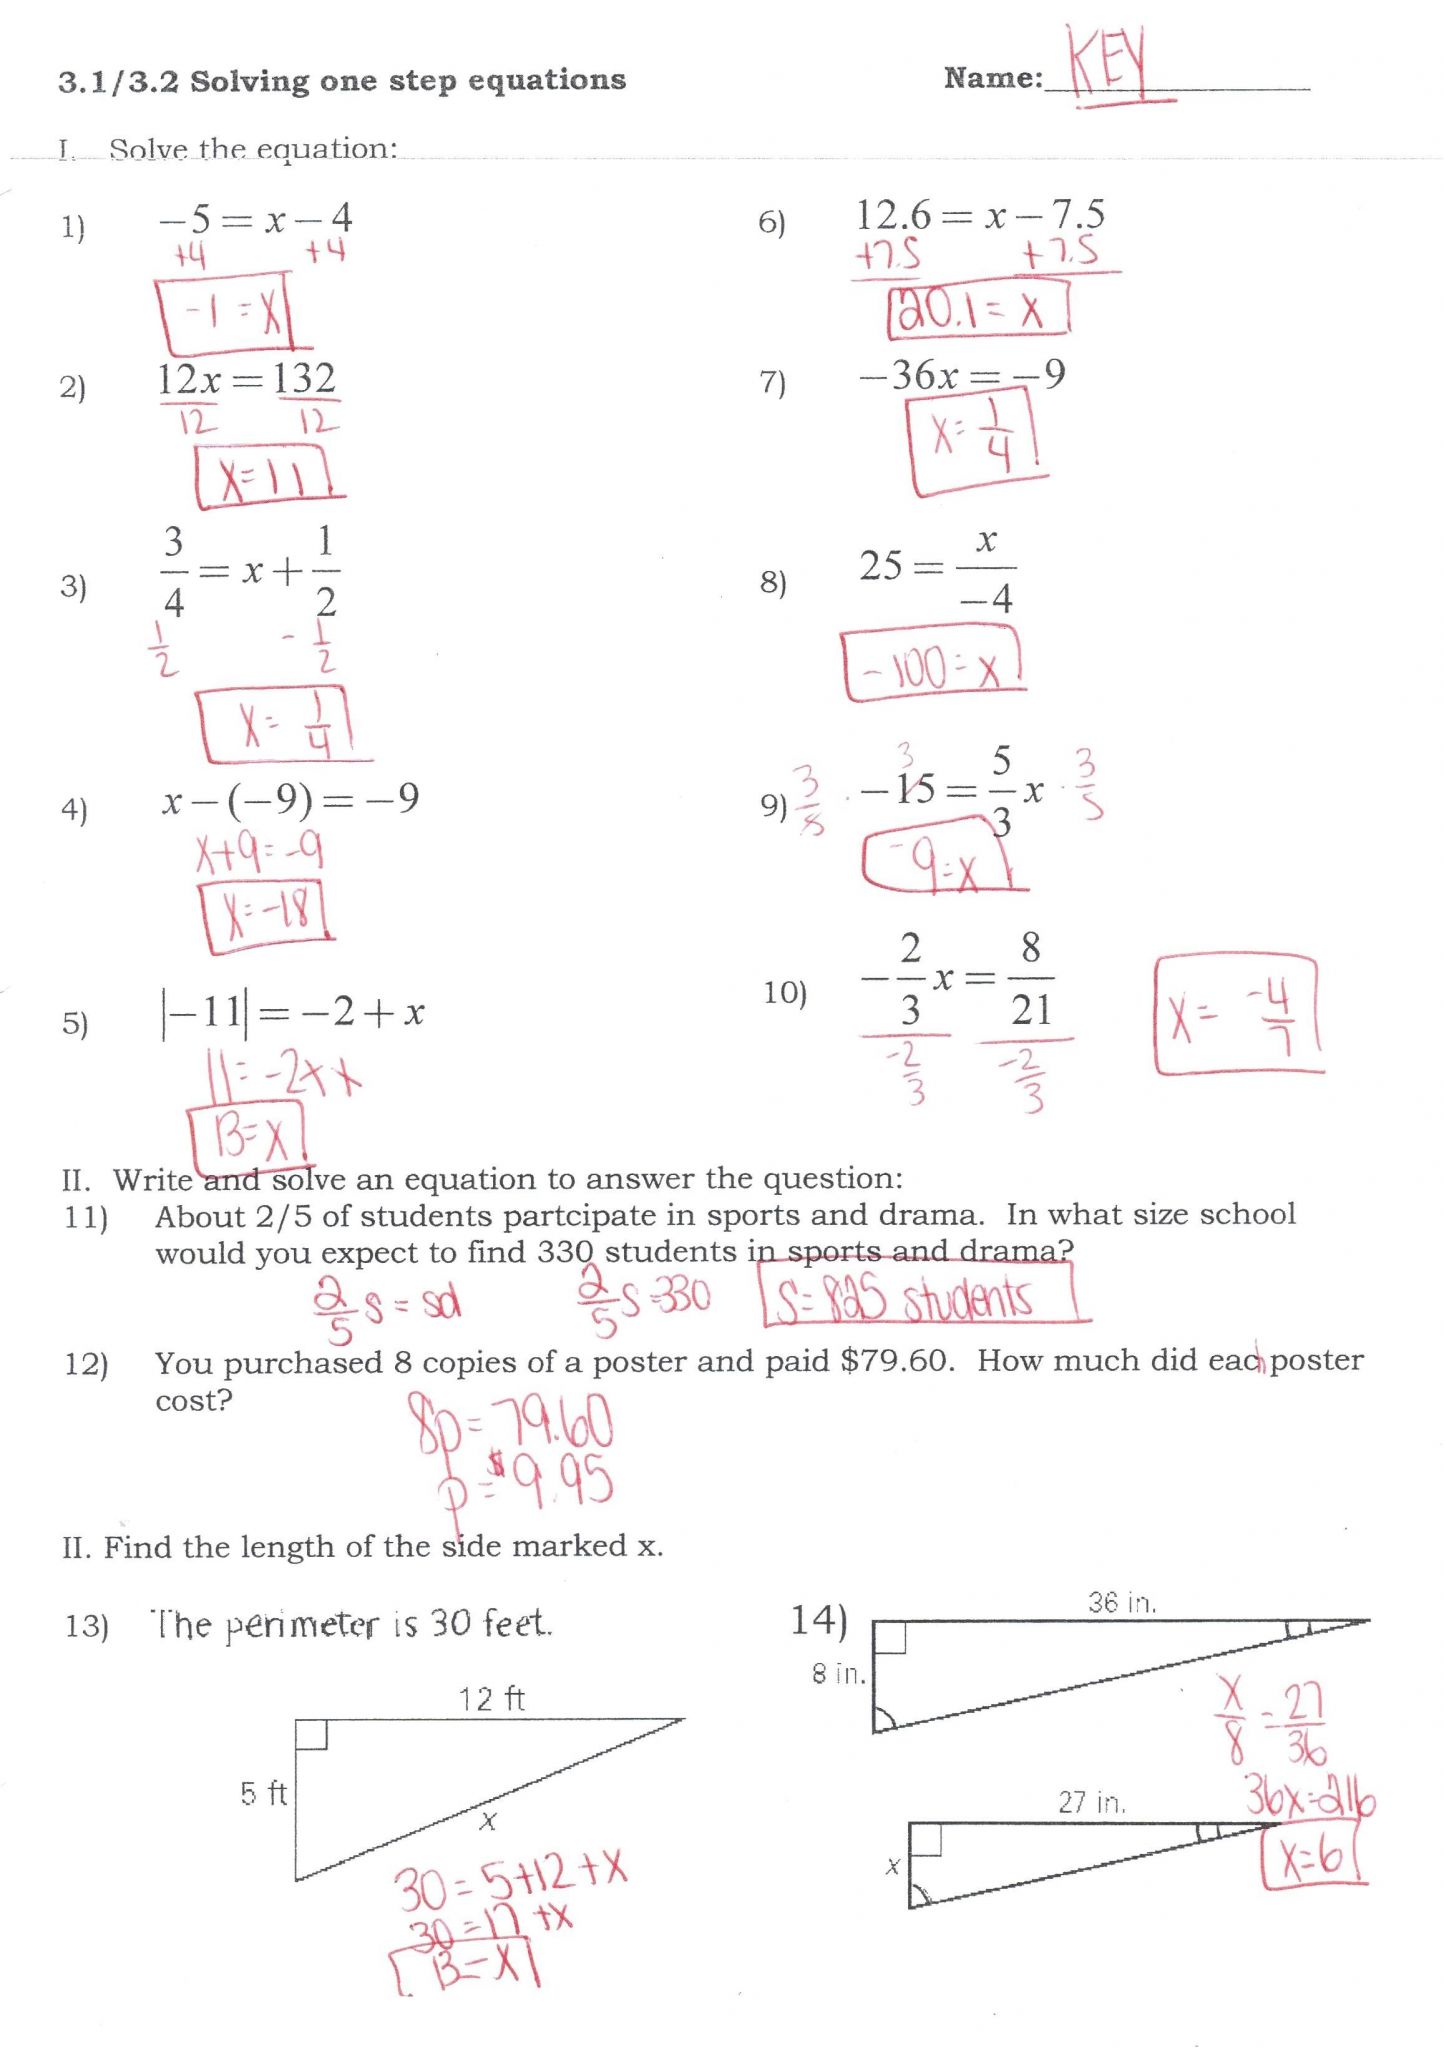 Solving Systems Equations by Elimination Worksheet Pdf Fresh solving by Substitution Worksheet Image Collections Worksheet